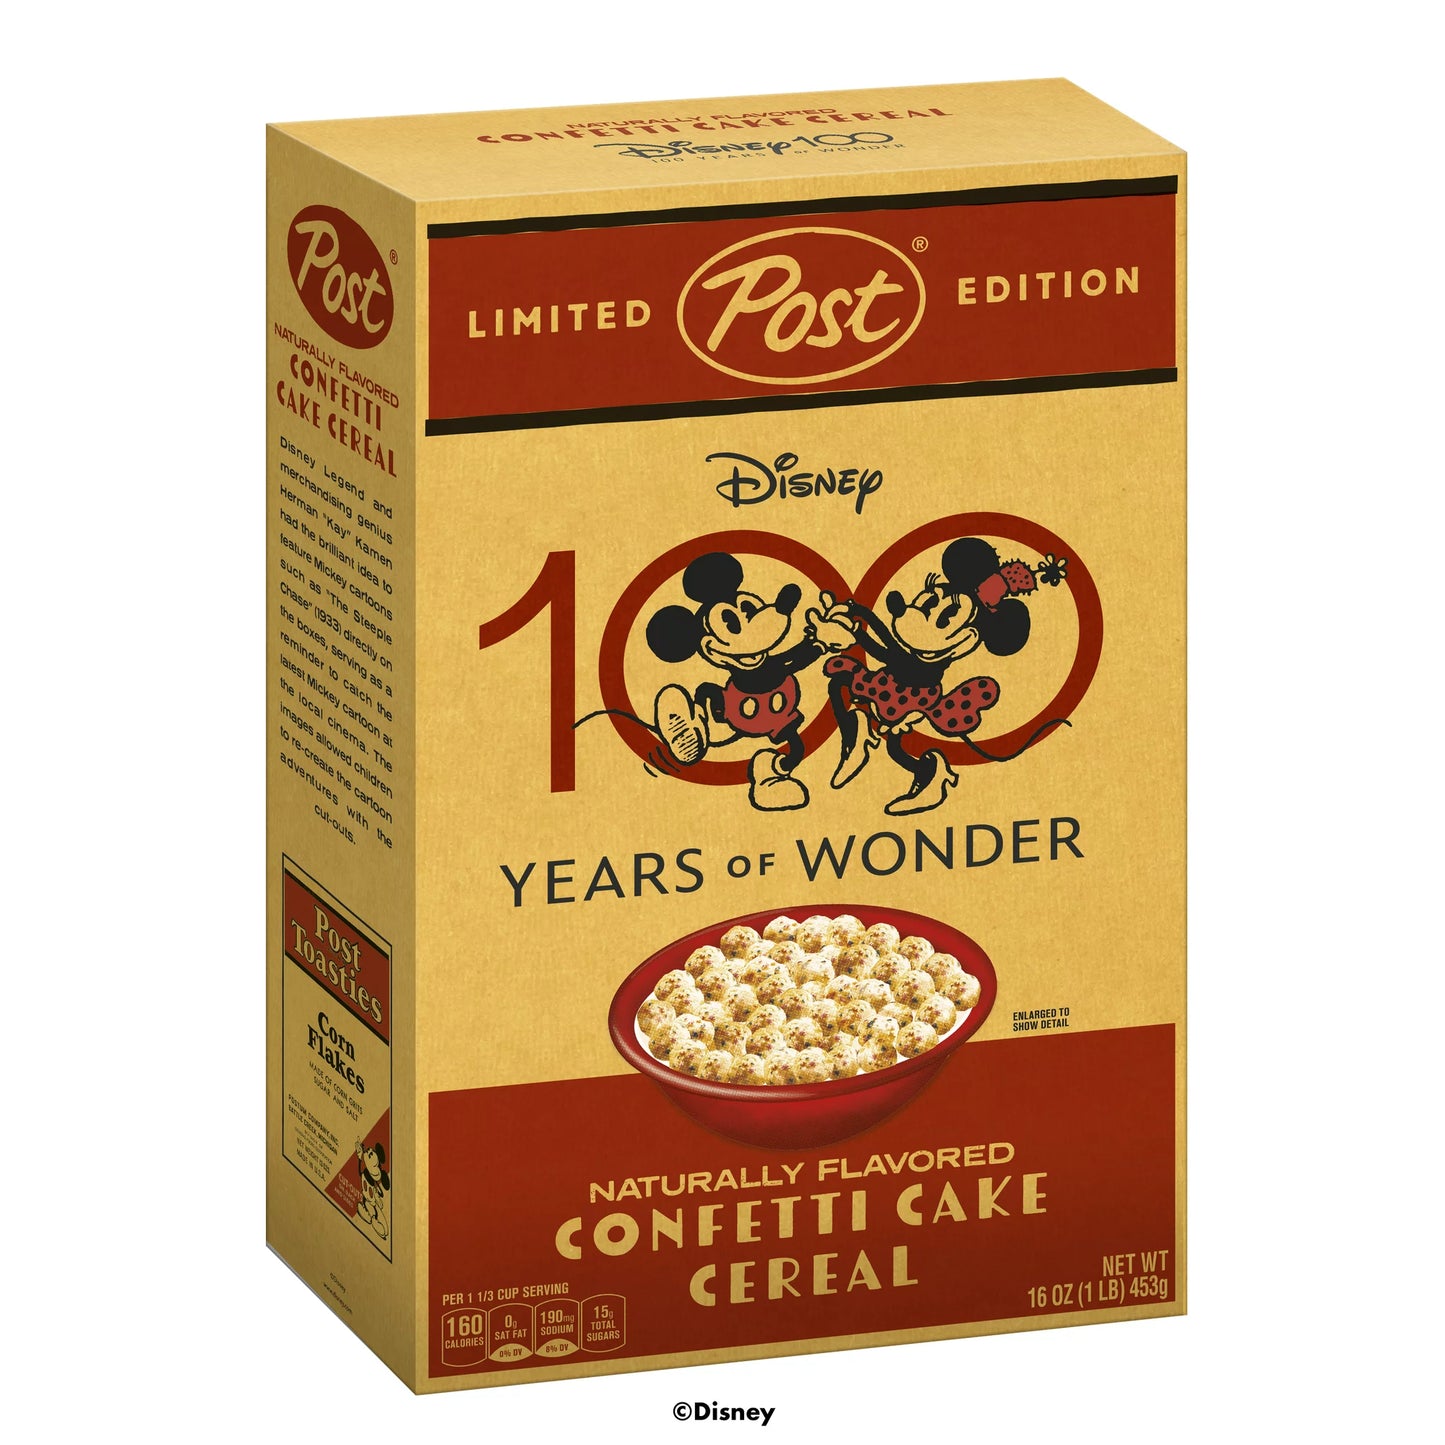 Disney 100 Years Confetti Cake Breakfast Cereal, Limited Edition Collectors Tin - ULTRA RARE COLLECTIABLE - Sold Out